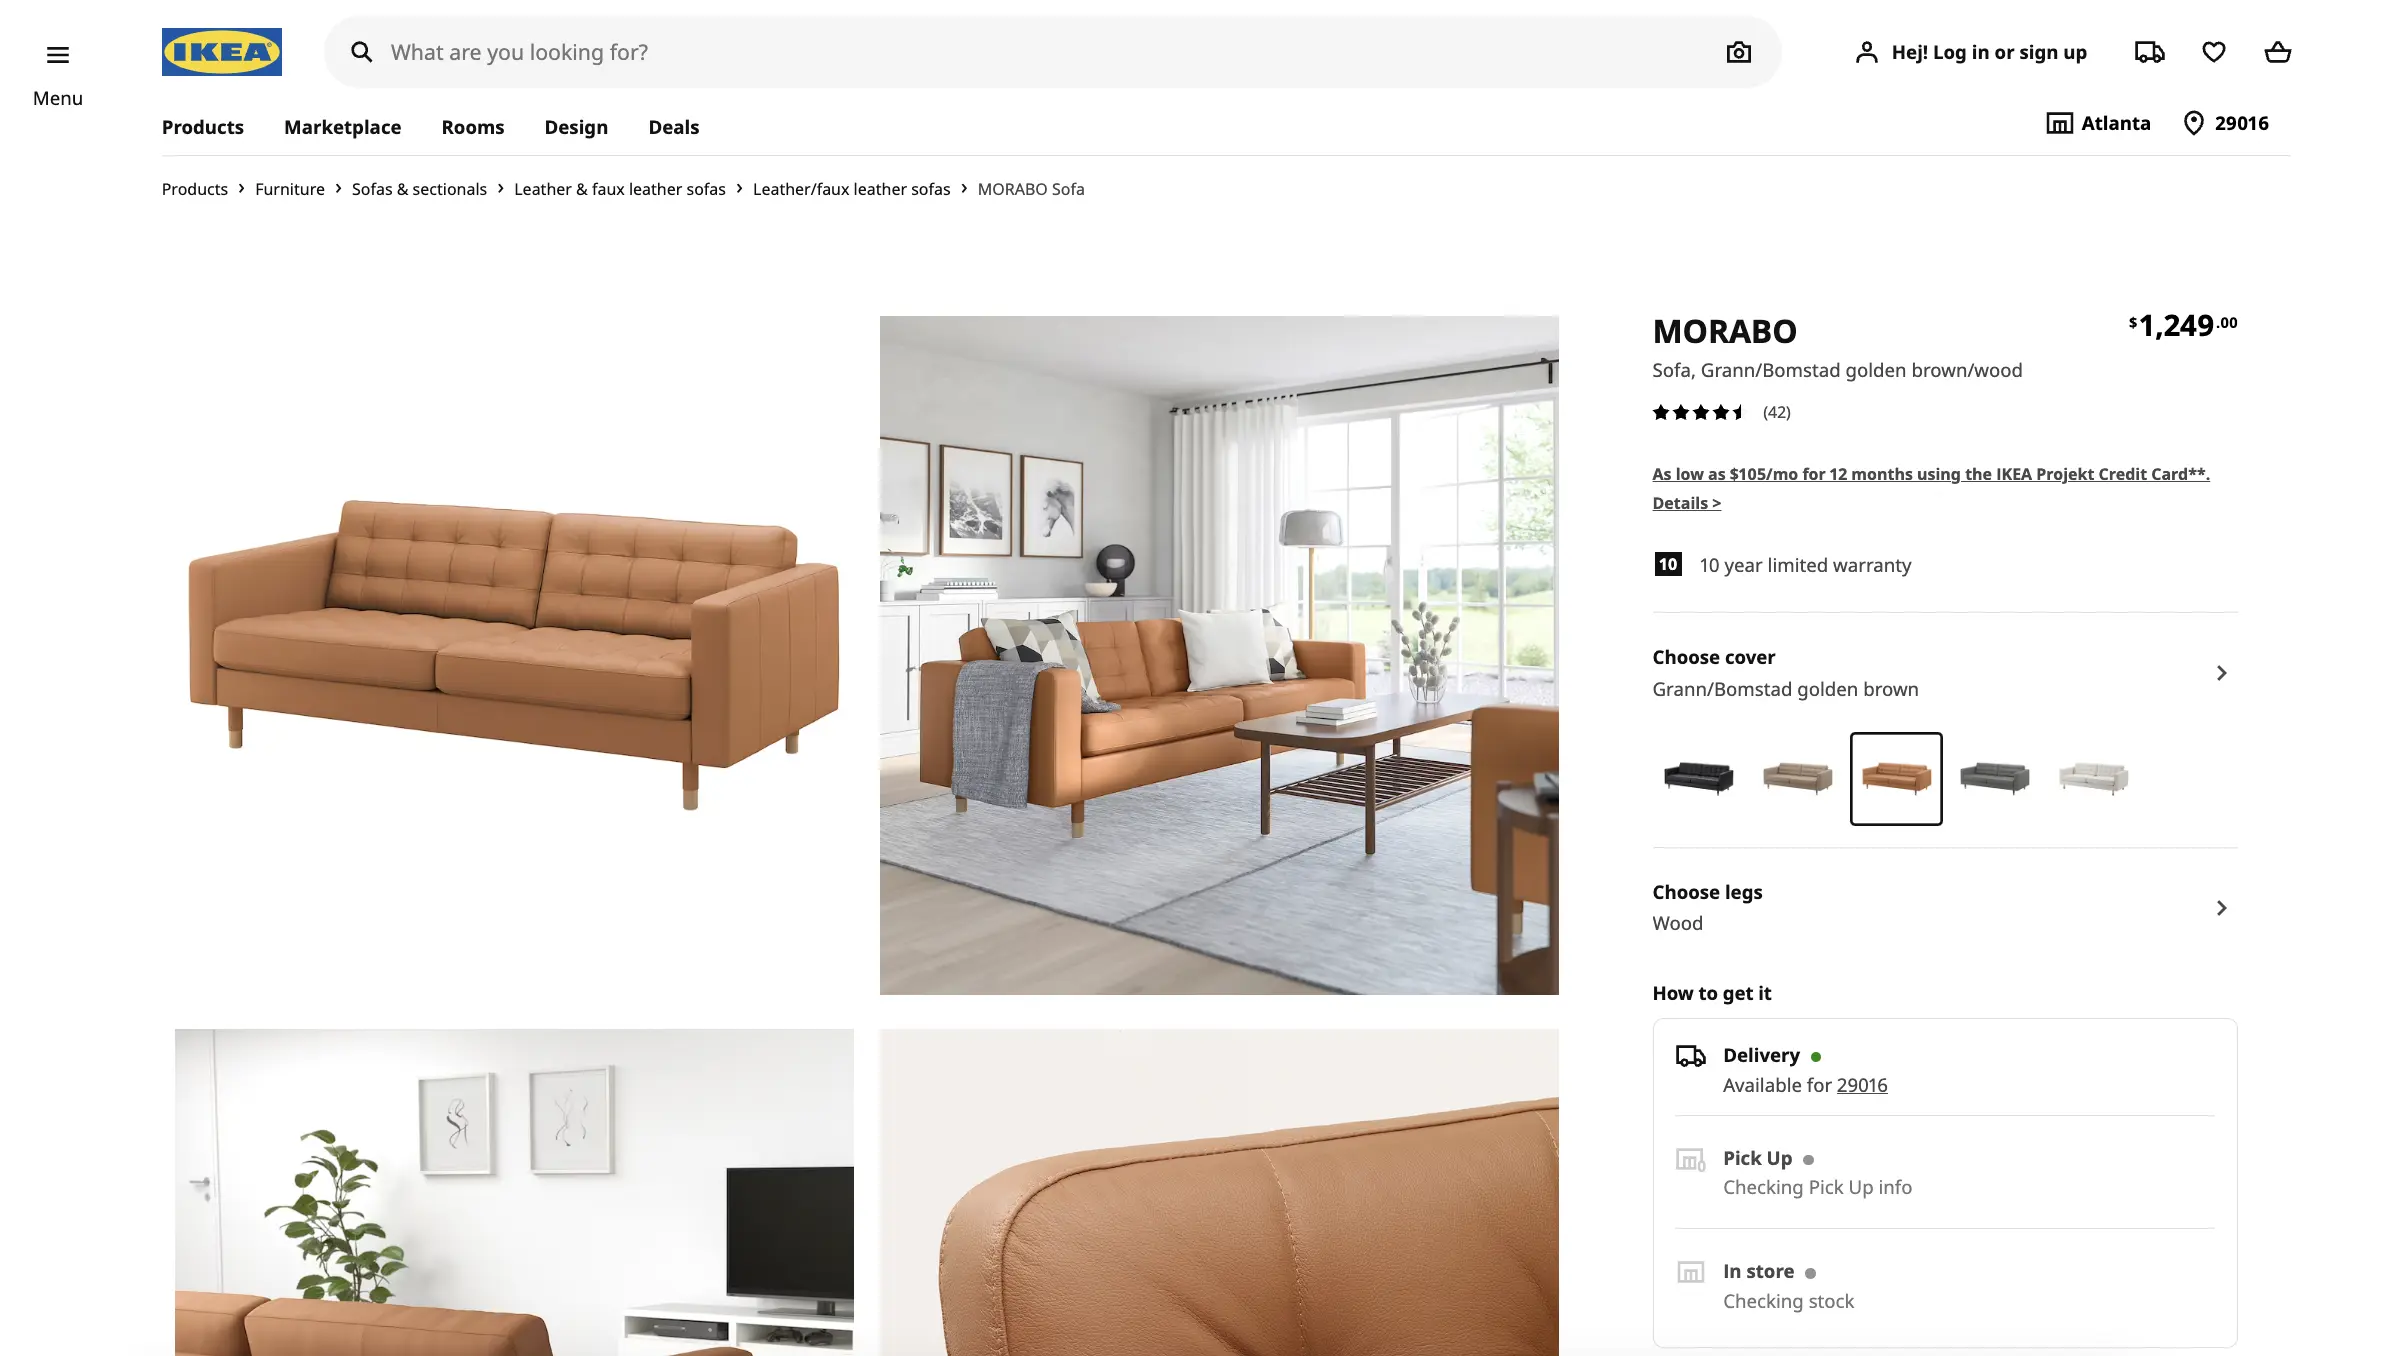 An example of classic colors for a sofa on an Ikea website